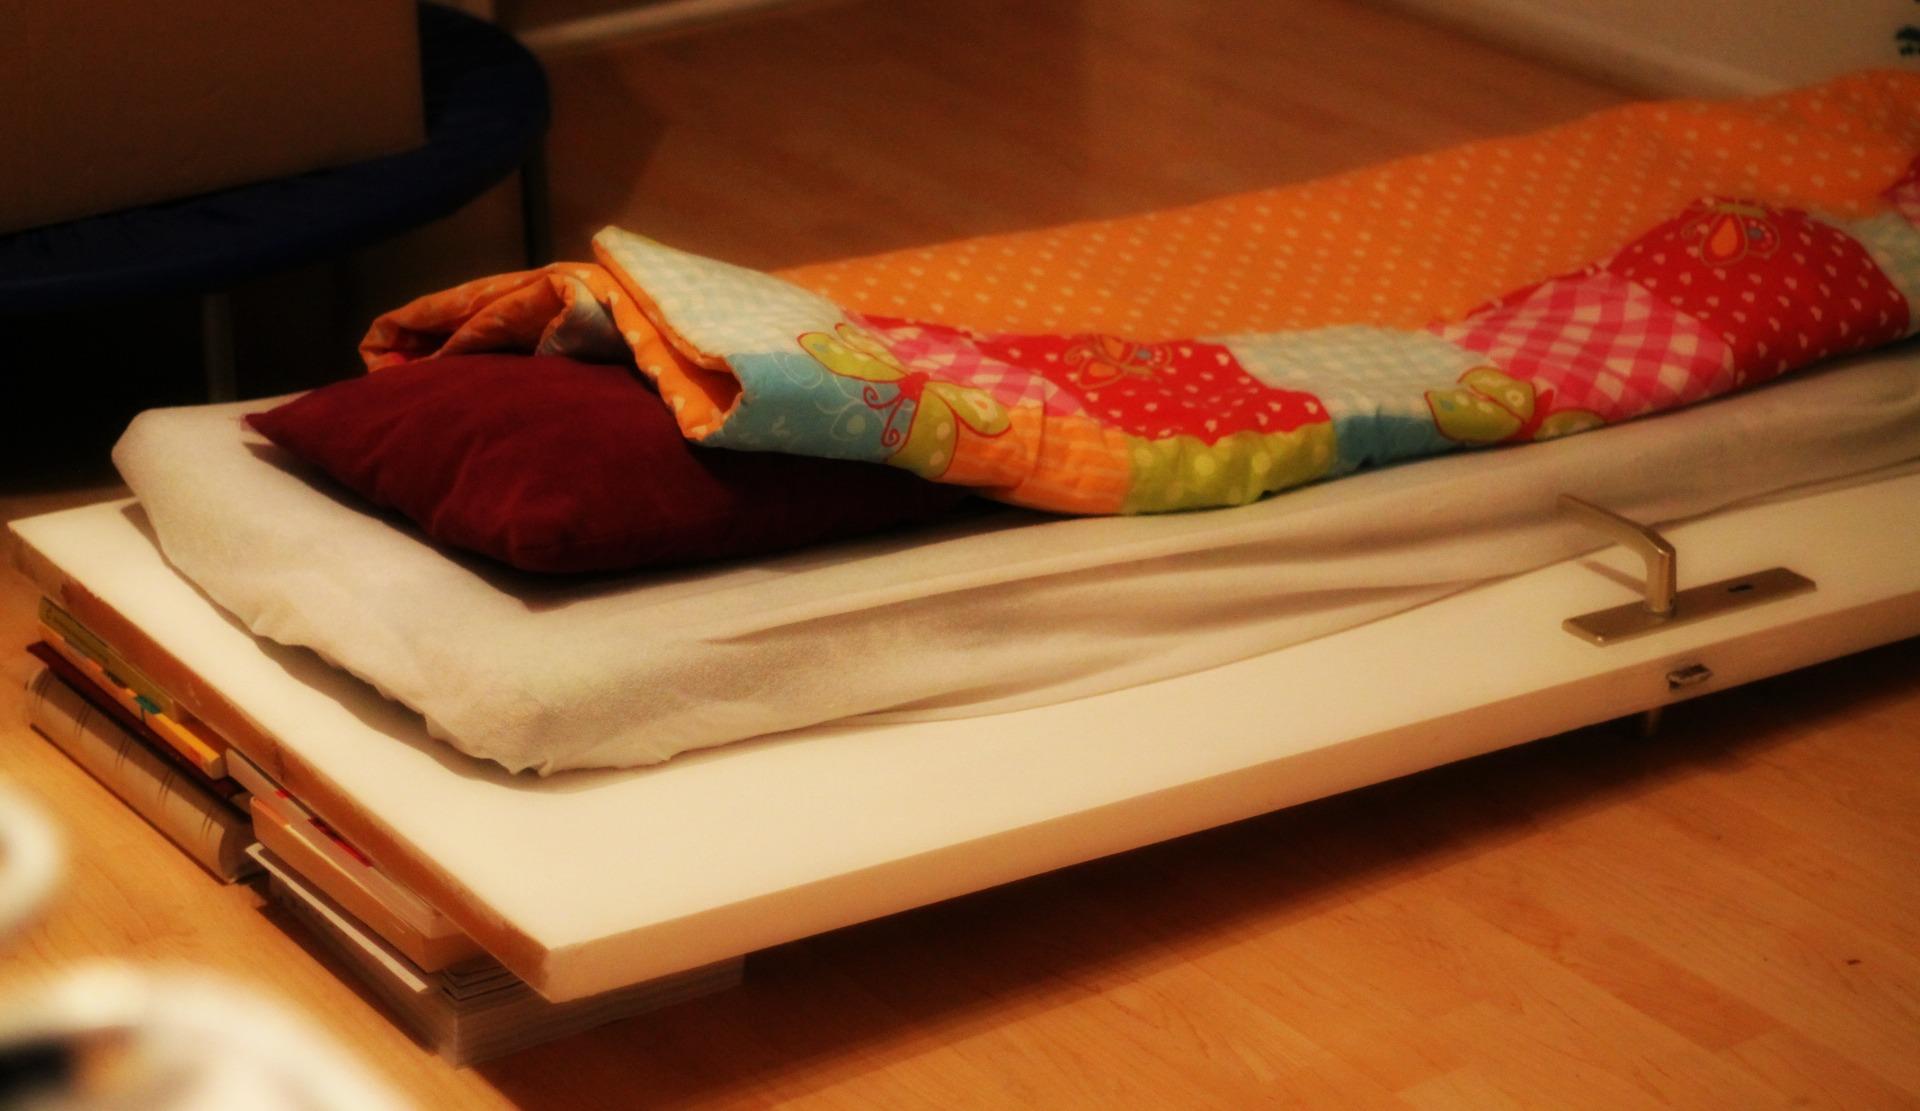 When is a door not a door? When it's an inclined bed that improves your health and wellbeing